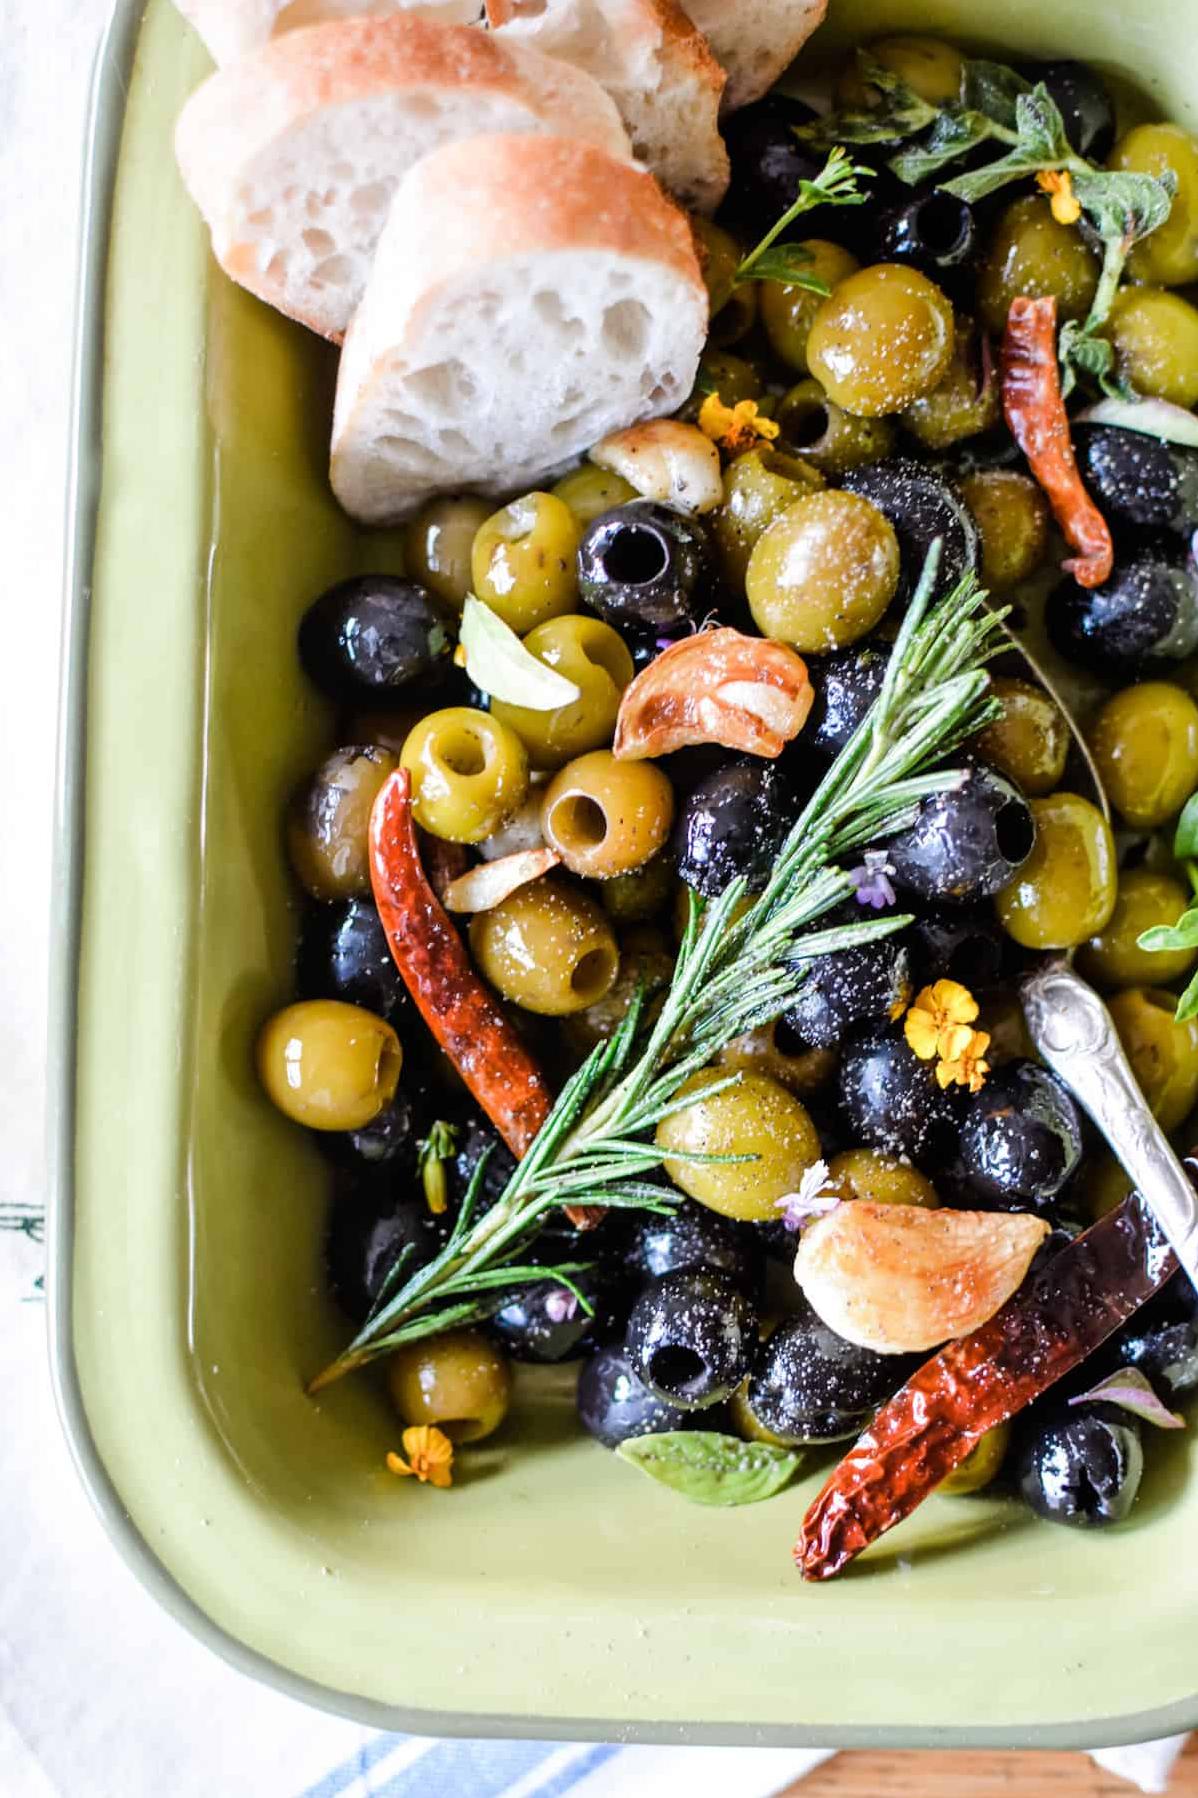  Spice up your snacking game with these Brazilian-style olives